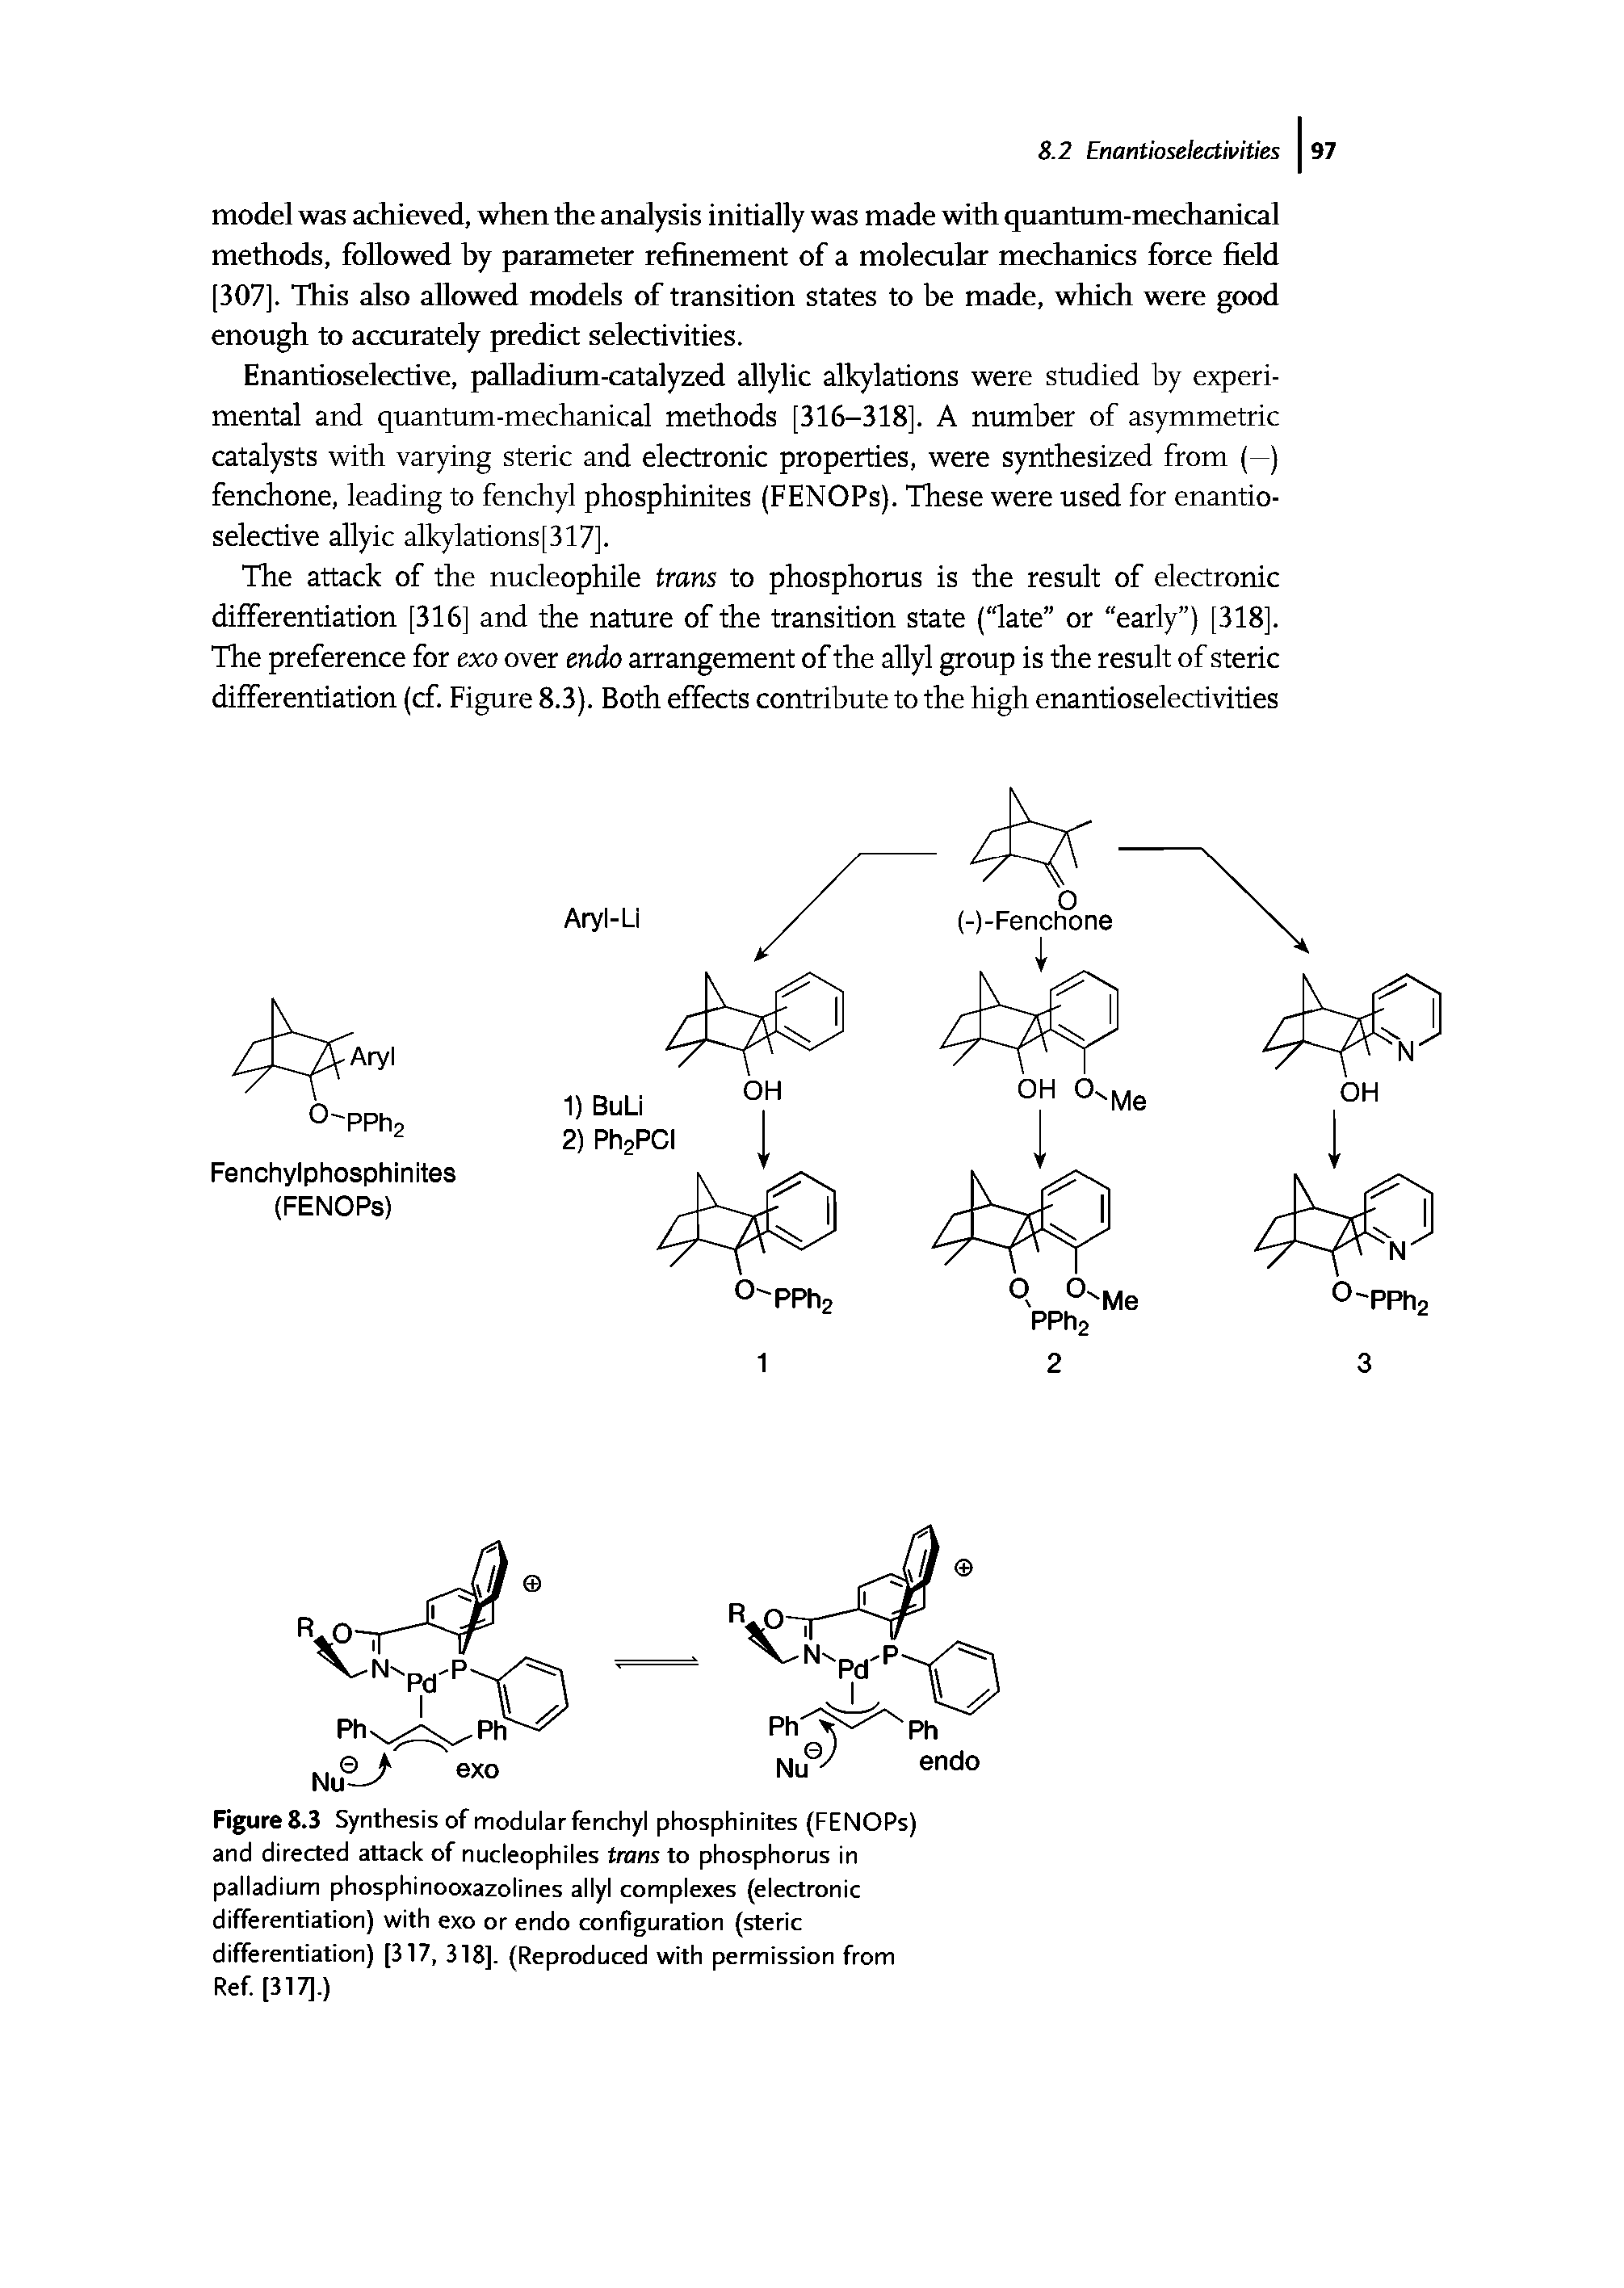 Figure 8.3 Synthesis of modular fenchyl phosphinites (FENOPs) and directed attack of nucleophiles trans to phosphorus In palladium phosphinooxazolines allyl complexes (electronic differentiation) with exo or endo configuration (steric differentiation) [317, 318]. (Reproduced with permission from Ref [317].)...